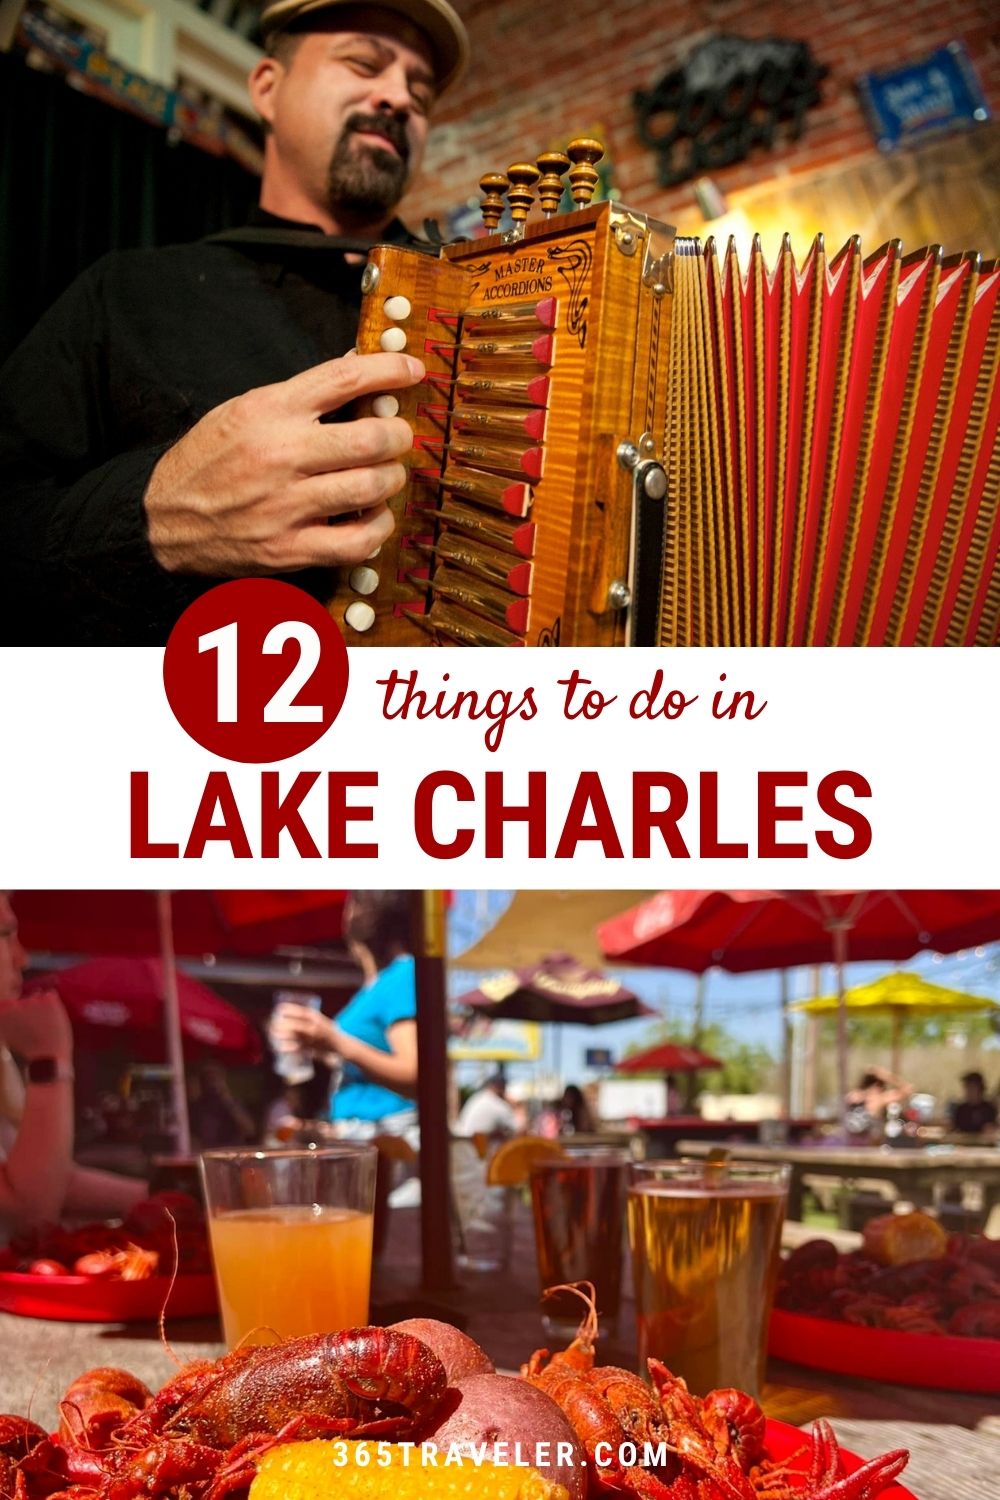 12 OUTSTANDING THINGS TO DO IN LAKE CHARLES, LA